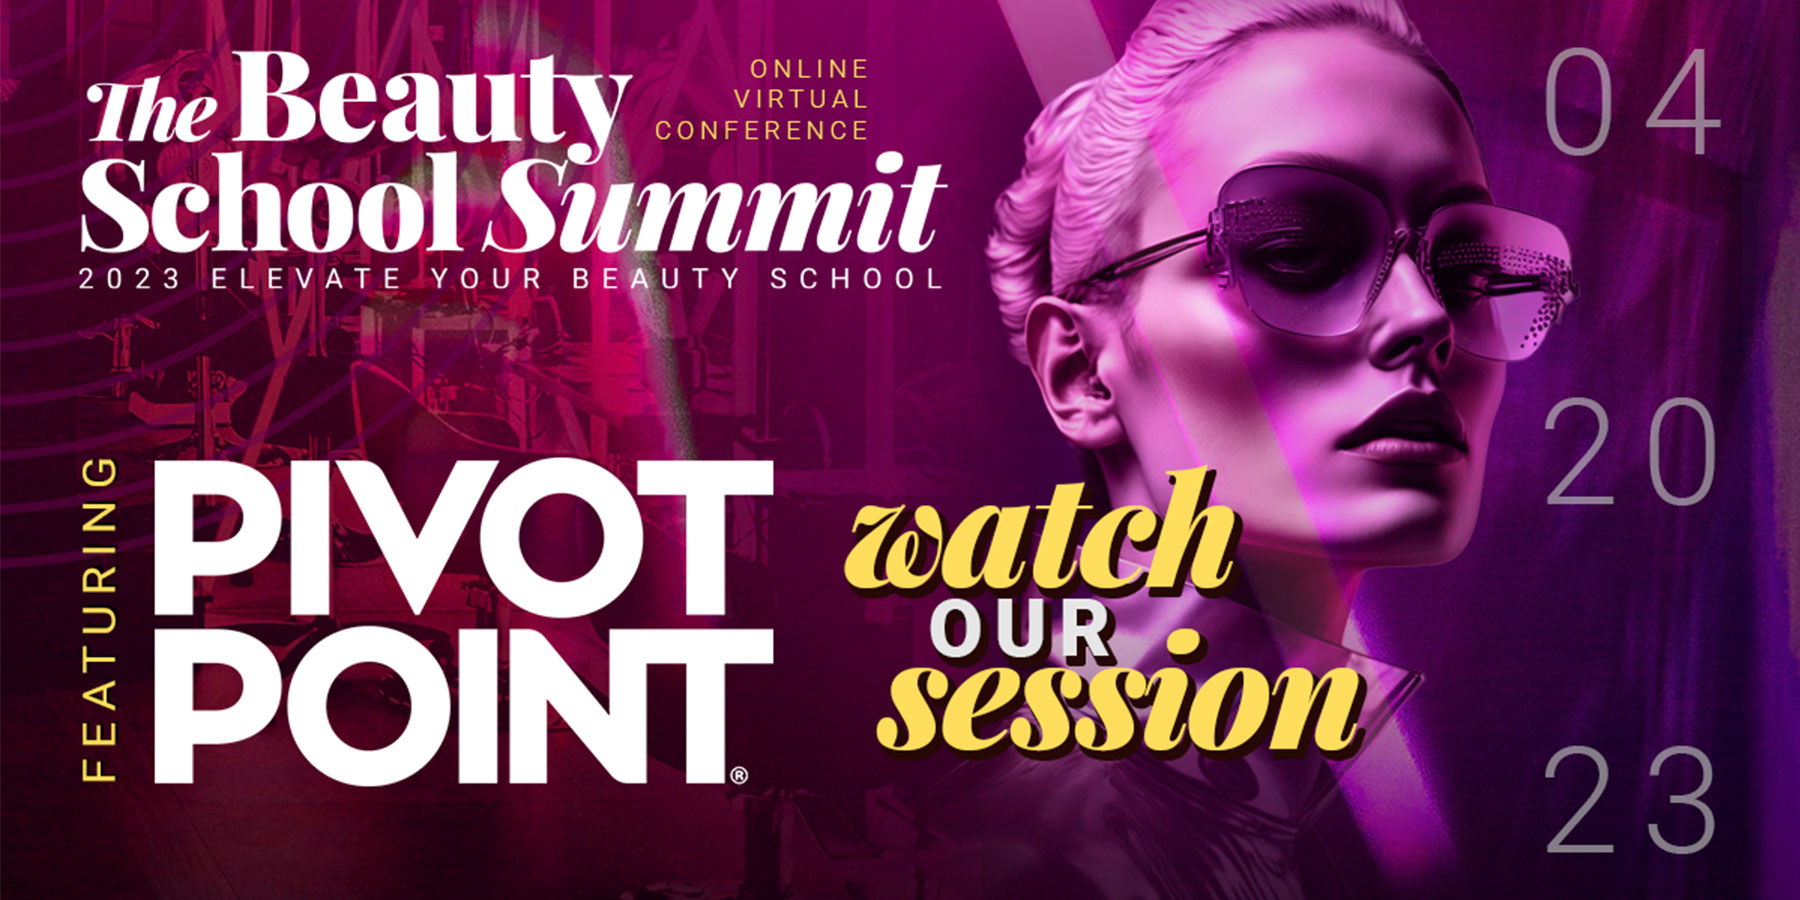 Register Now For The Beauty School Summit